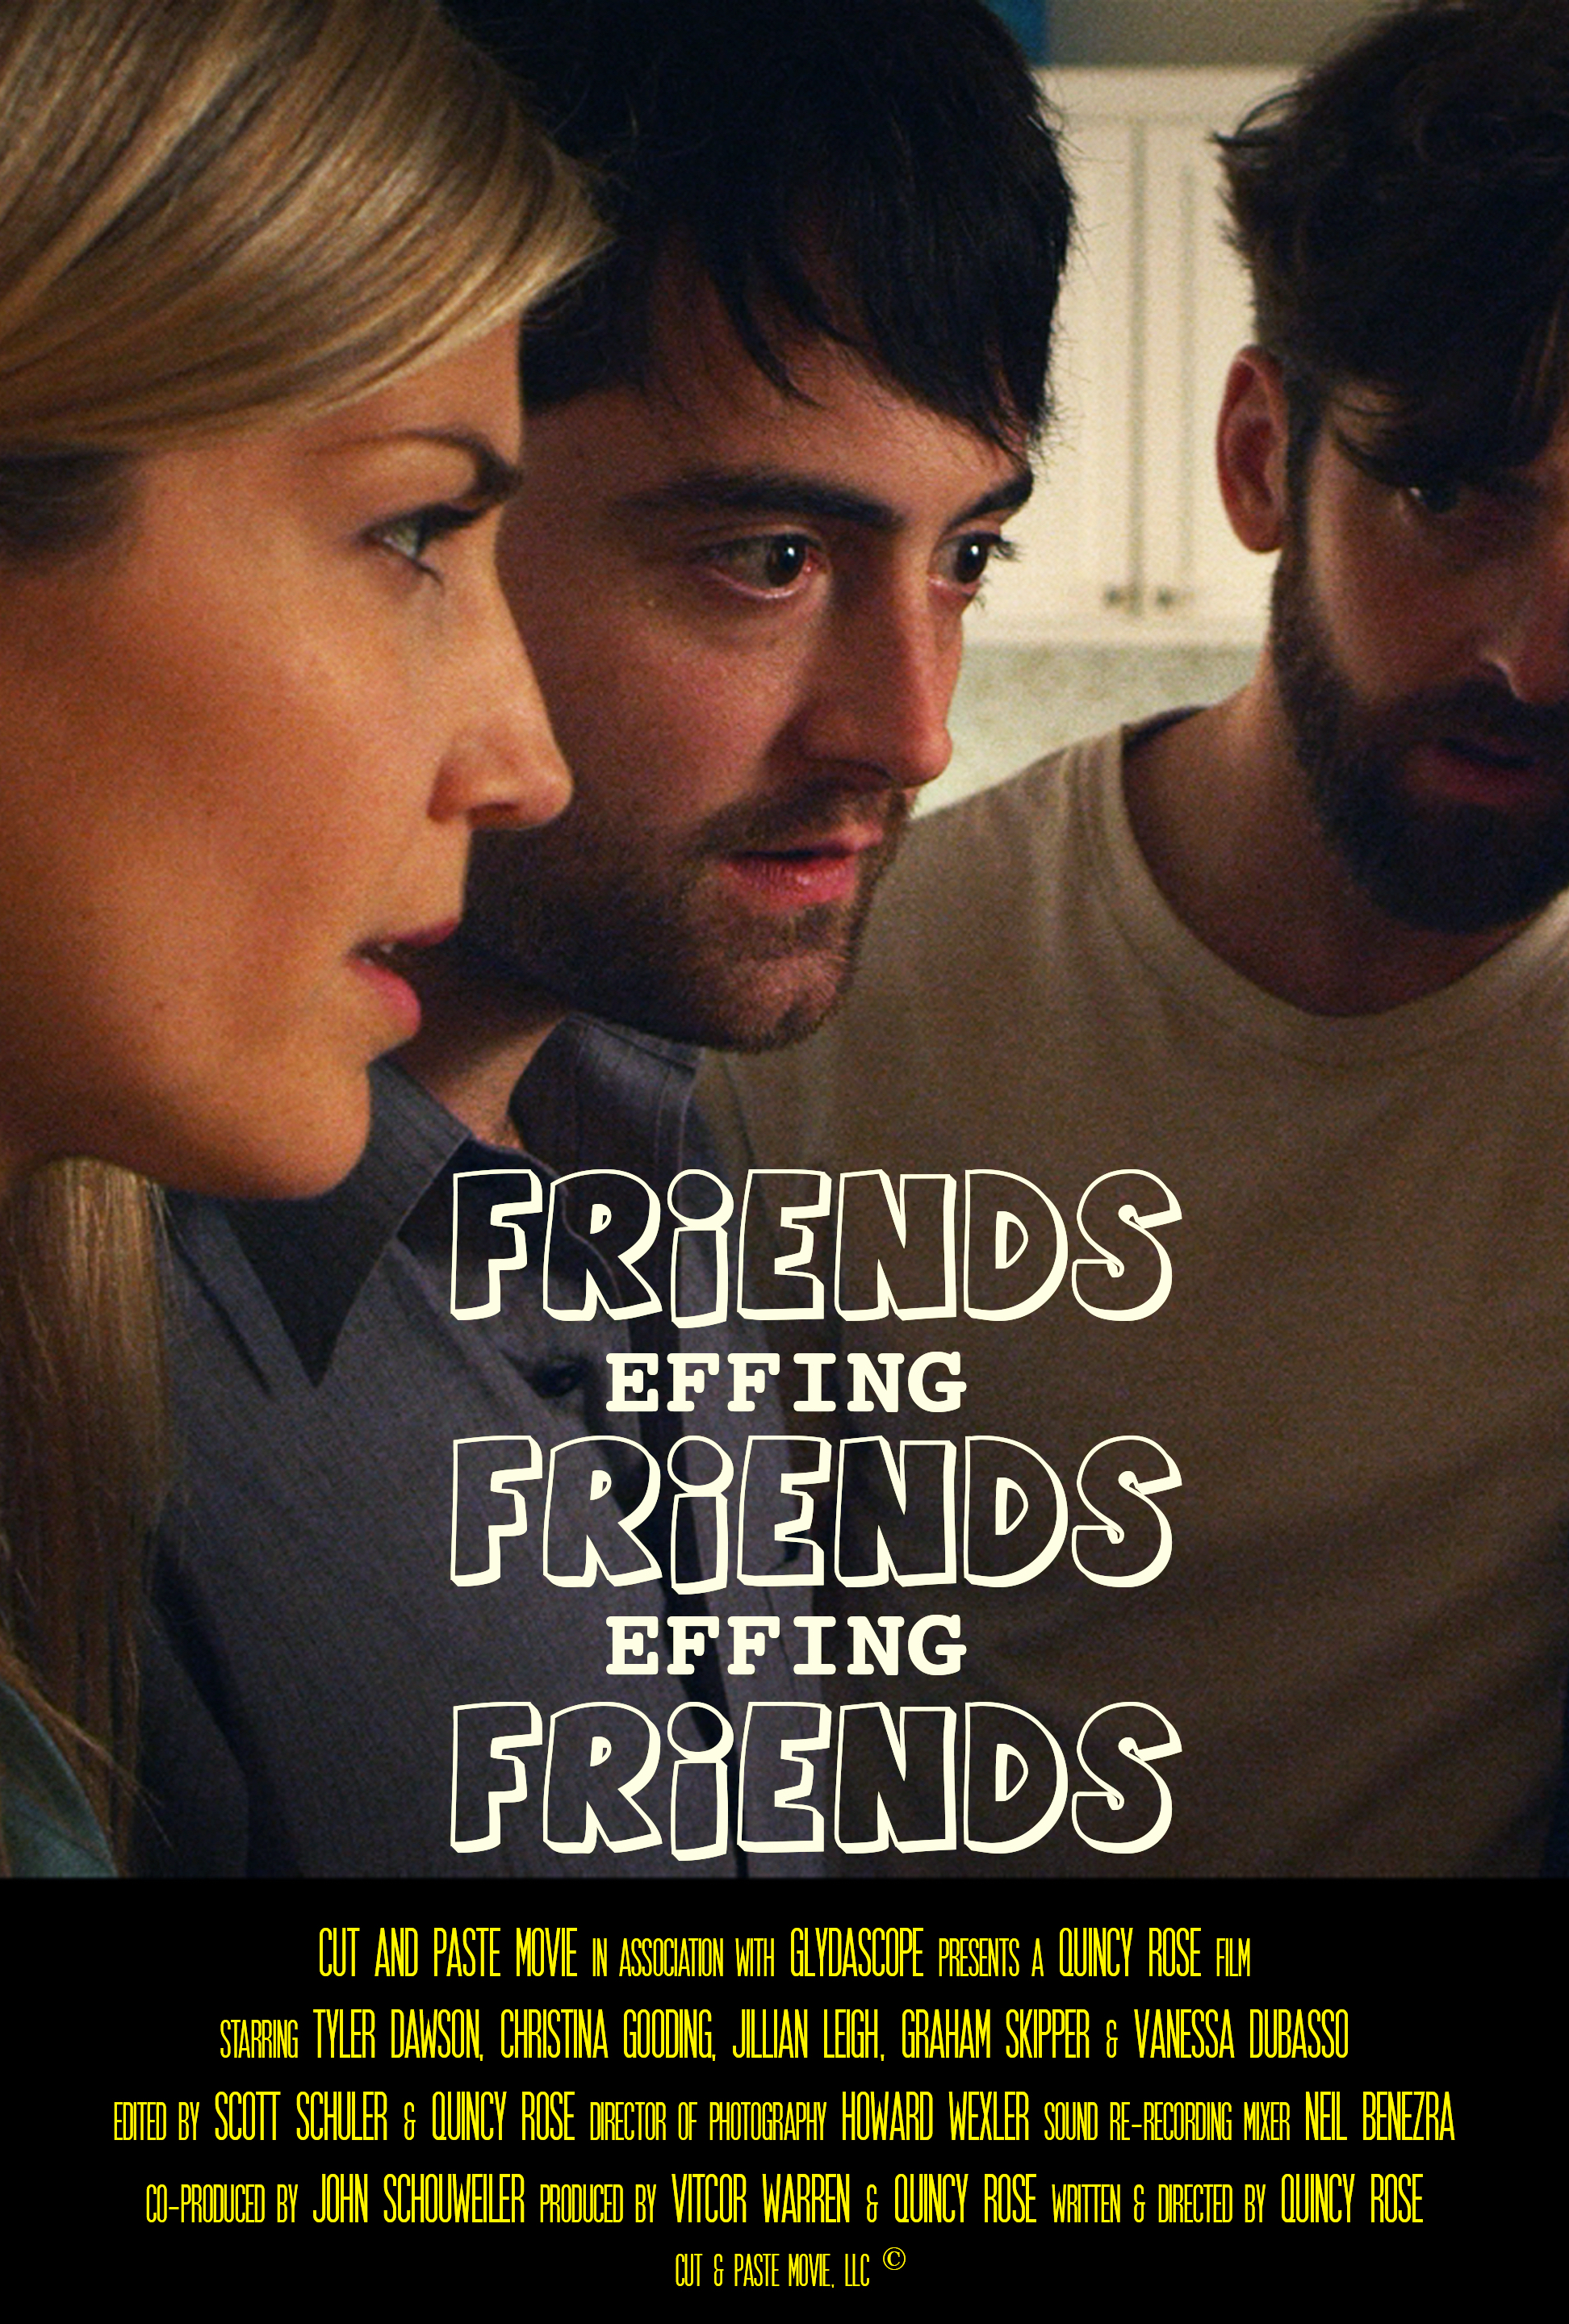 abigail wise recommends Friends Effing Friends